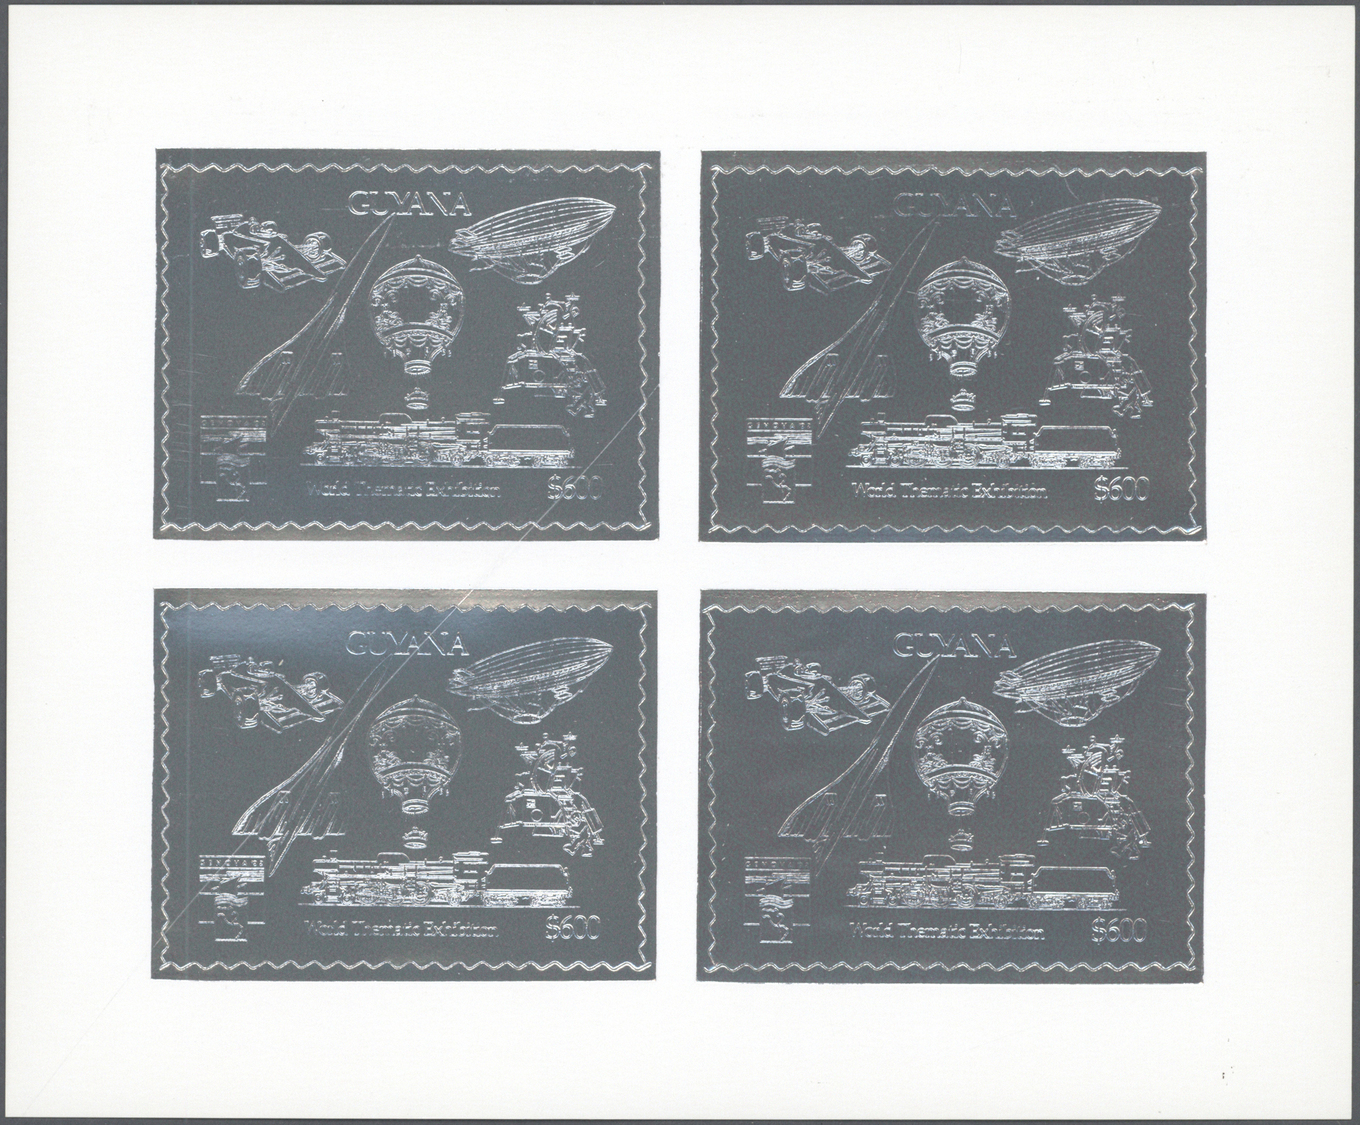 ** Guyana: 1992, International Stamp Exhibition GENOVA'92 complete set of 18 GOLD and SILVER thematic stamps in sheetlet